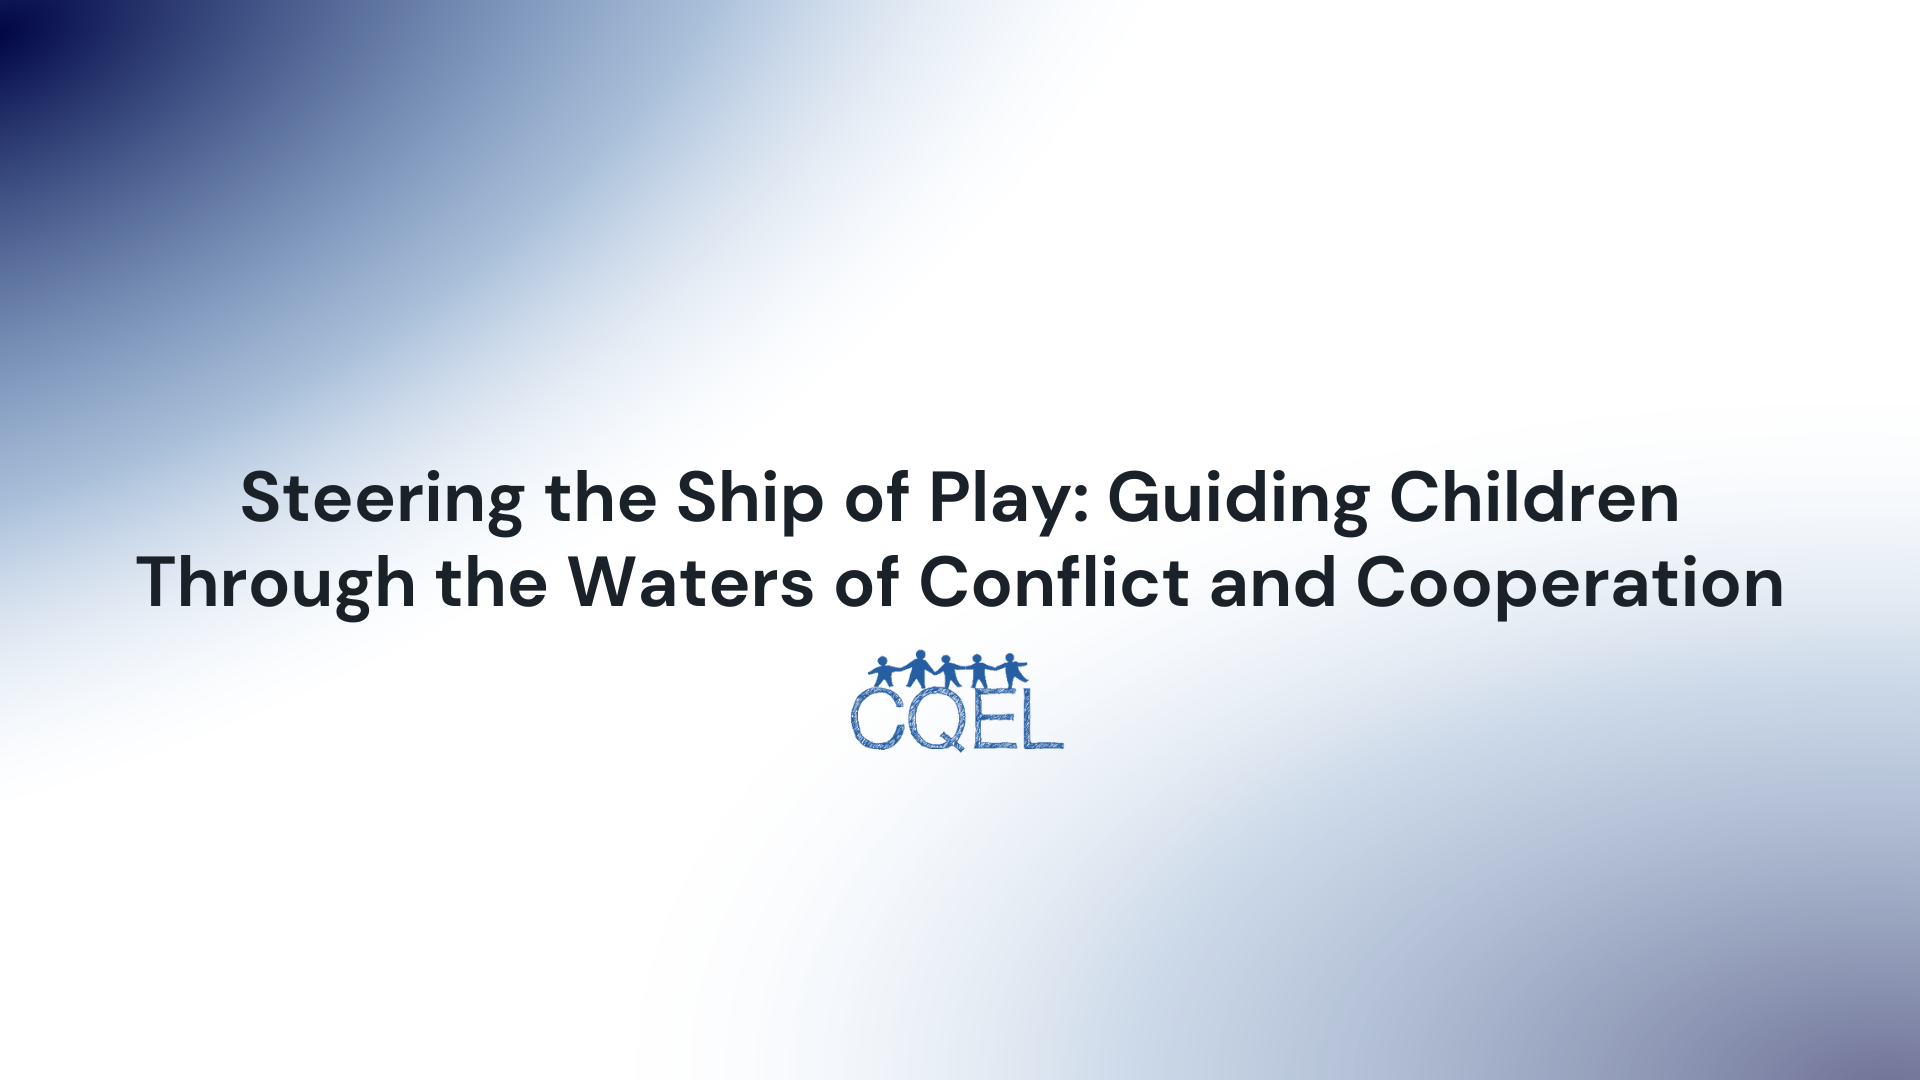 Steering the Ship of Play: Guiding Children Through the Waters of Conflict and Cooperation